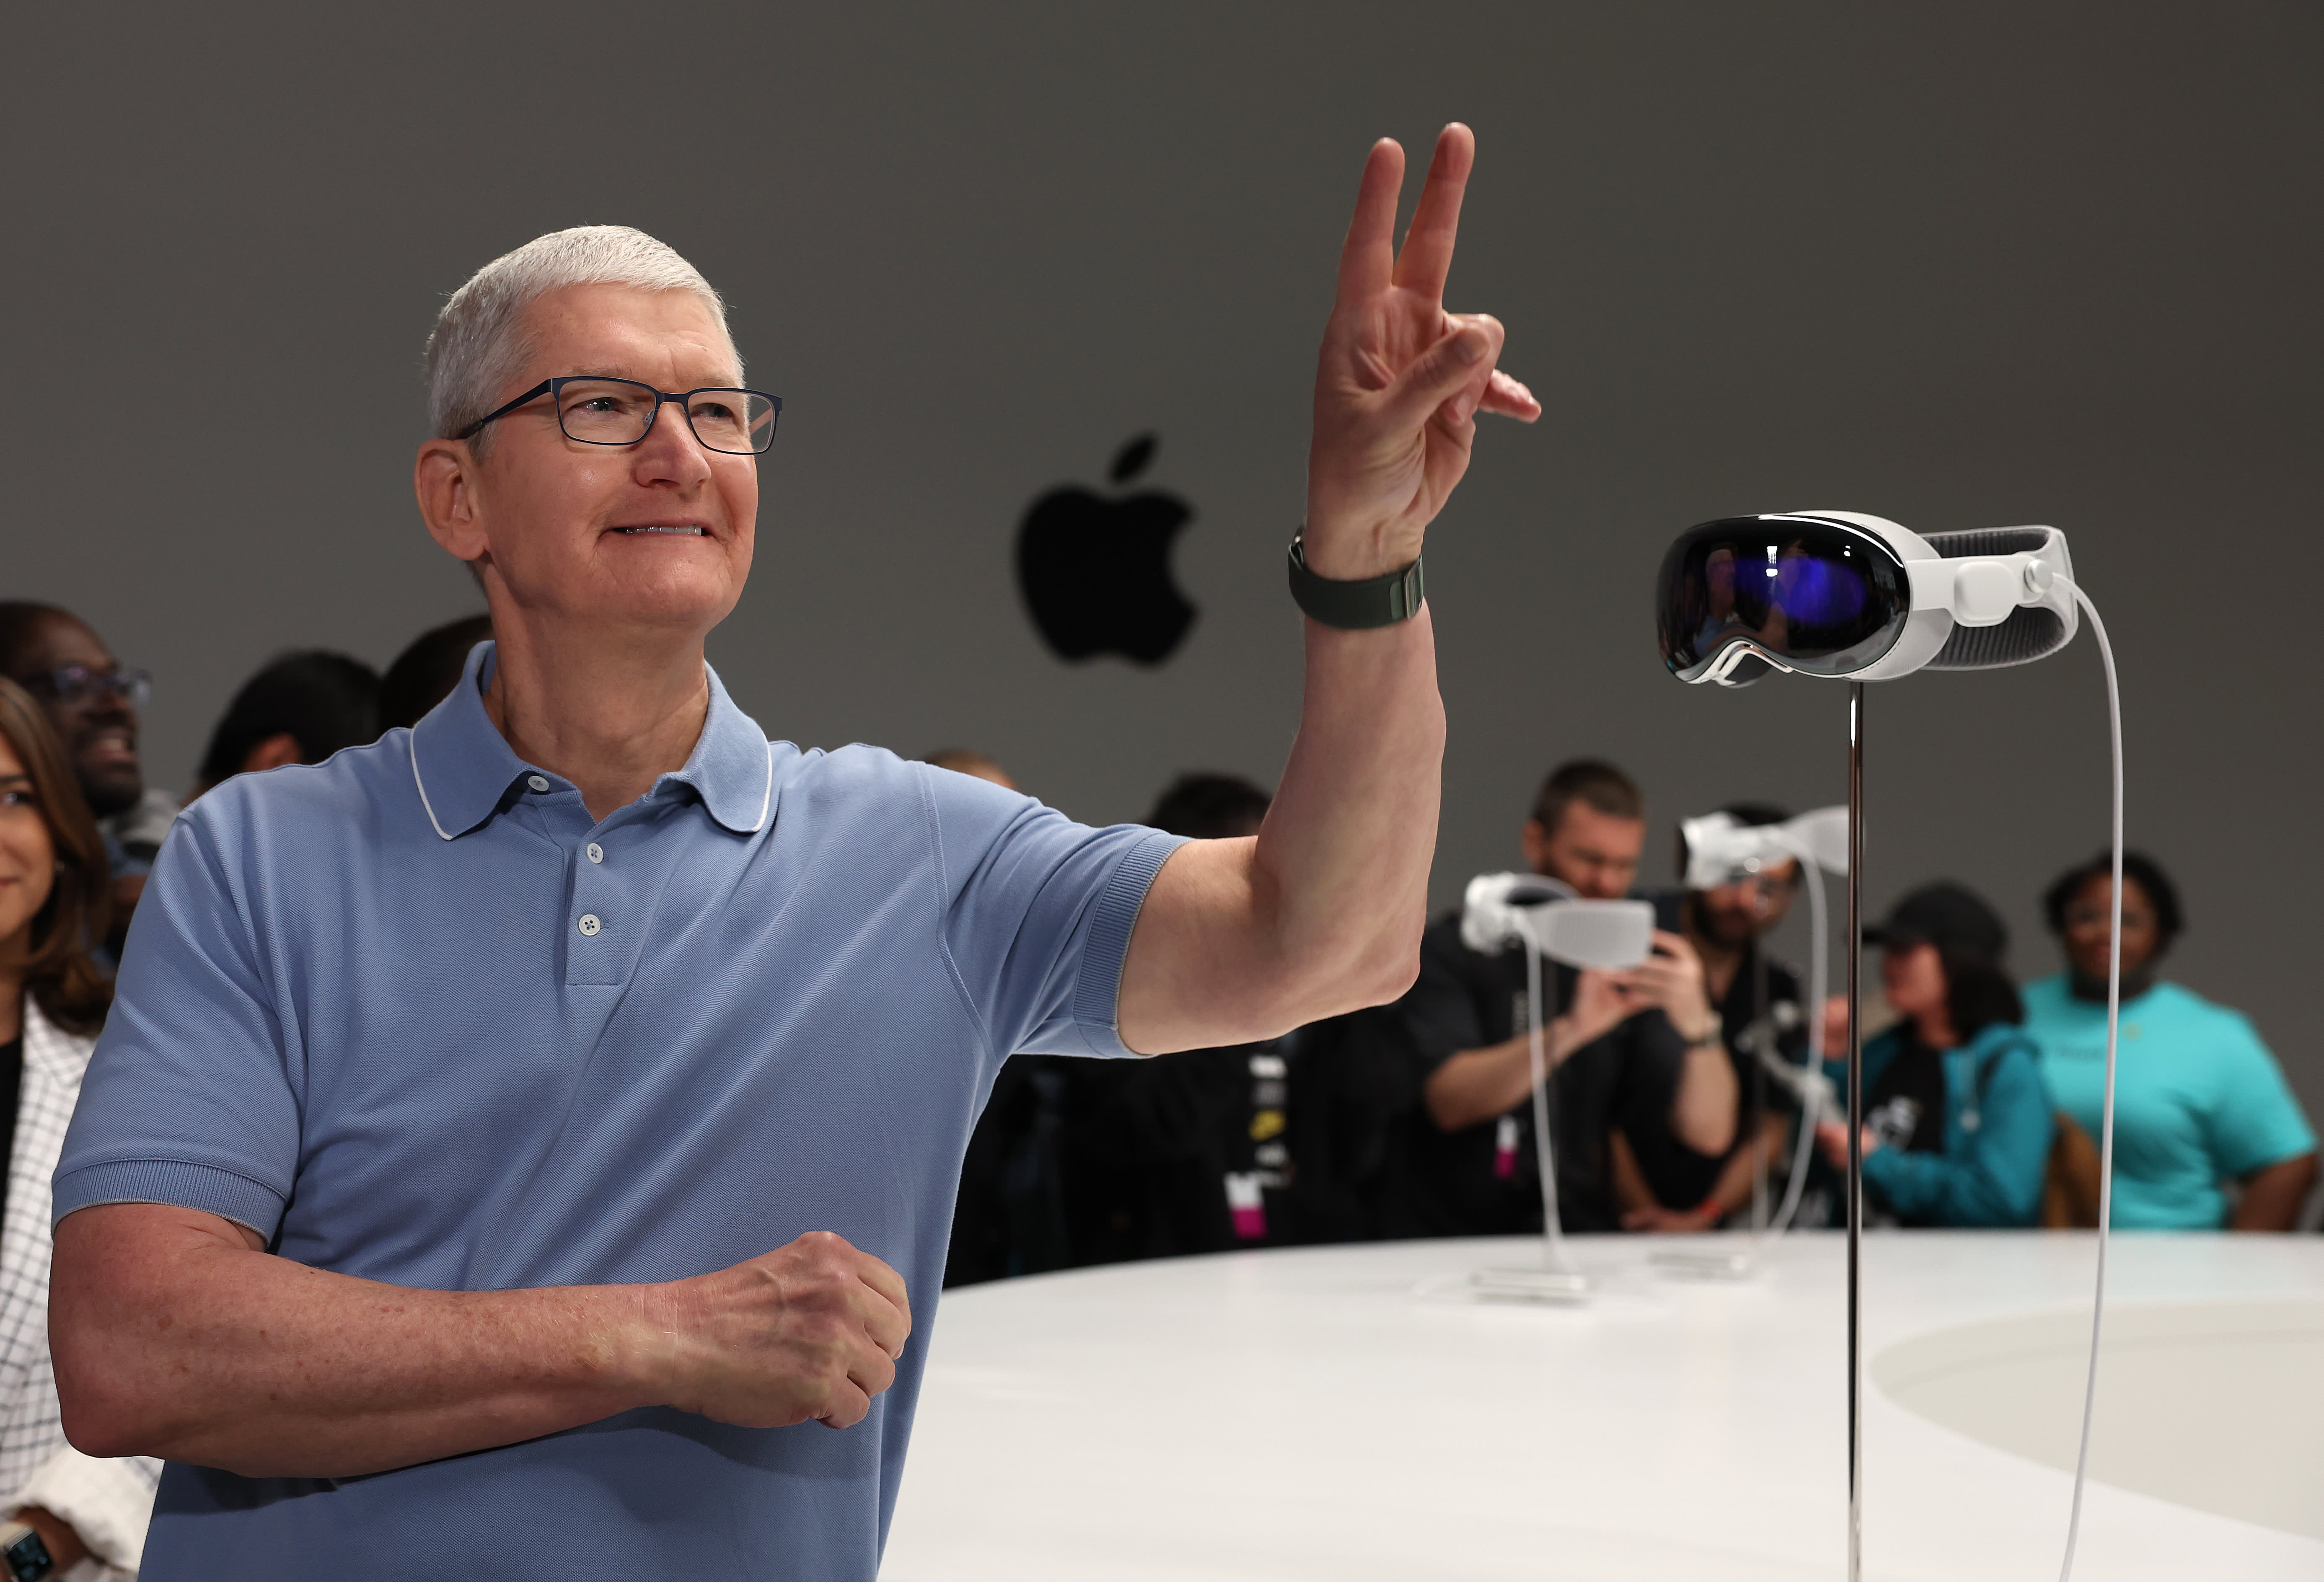 3 things for investors to consider after the big launch of Apple's new headset